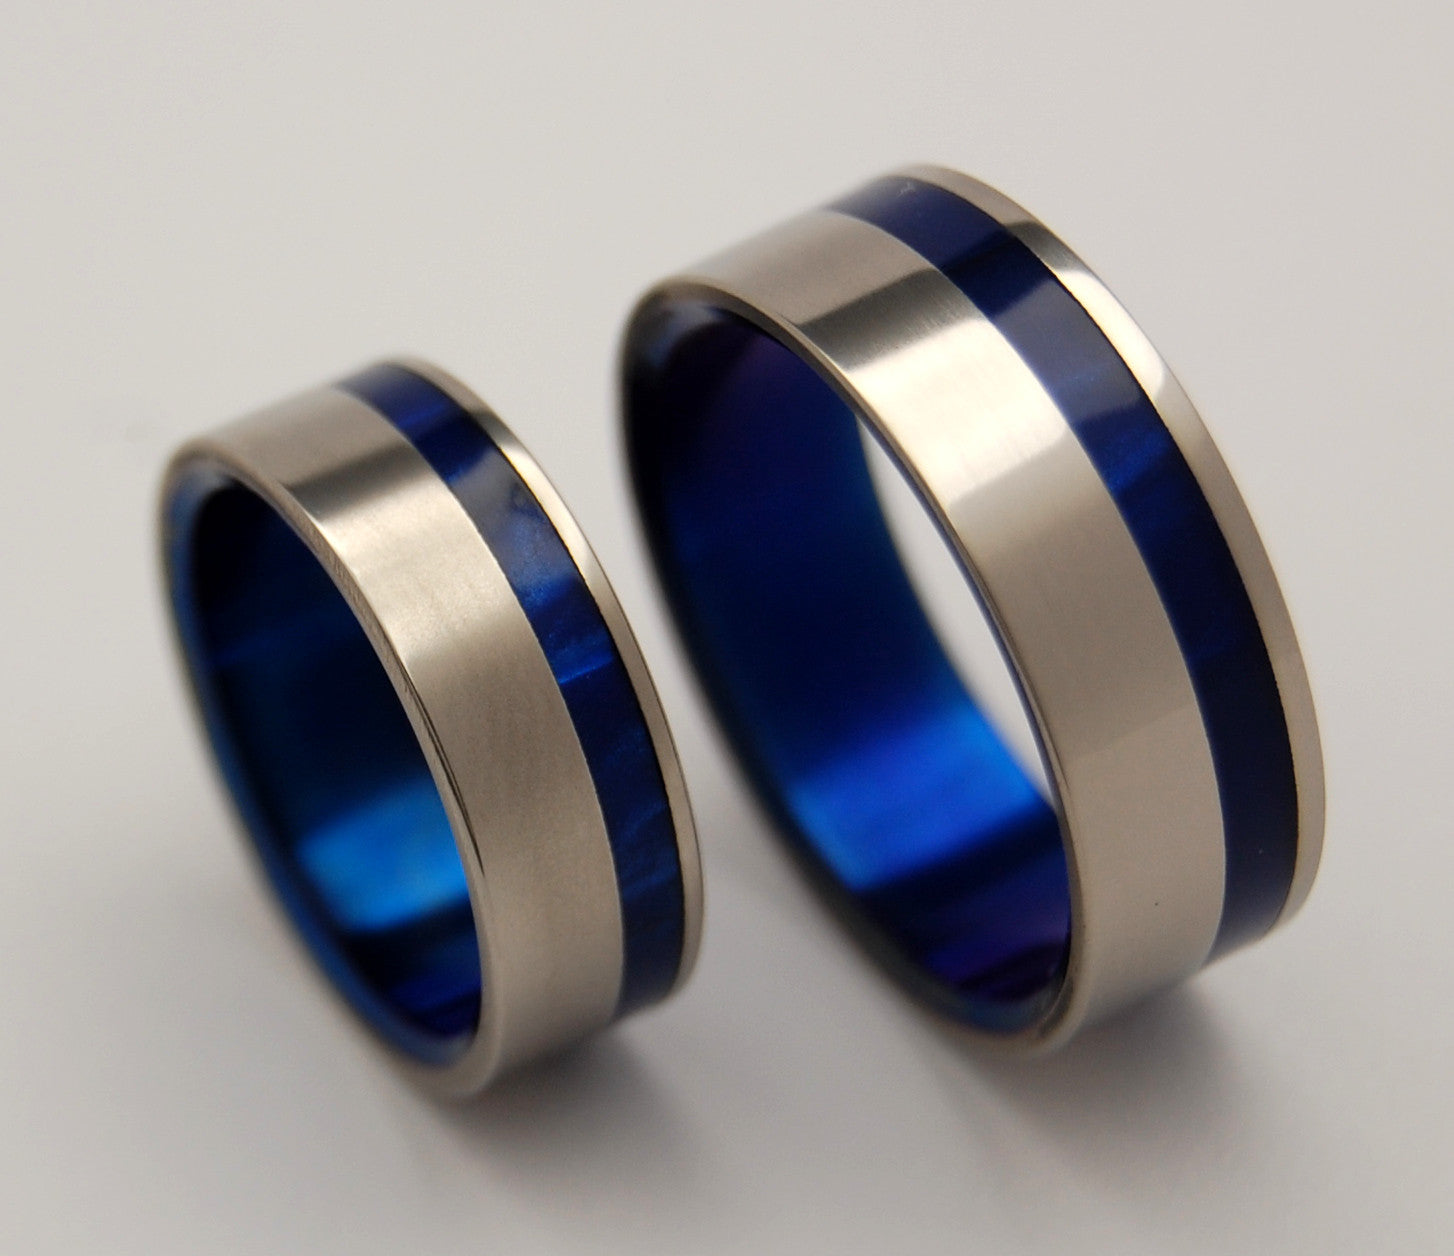 TO THE WINDS RESIGN | Blue Marbled Resin & Titanium - Unique Wedding Rings - Wedding Rings Set - Minter and Richter Designs